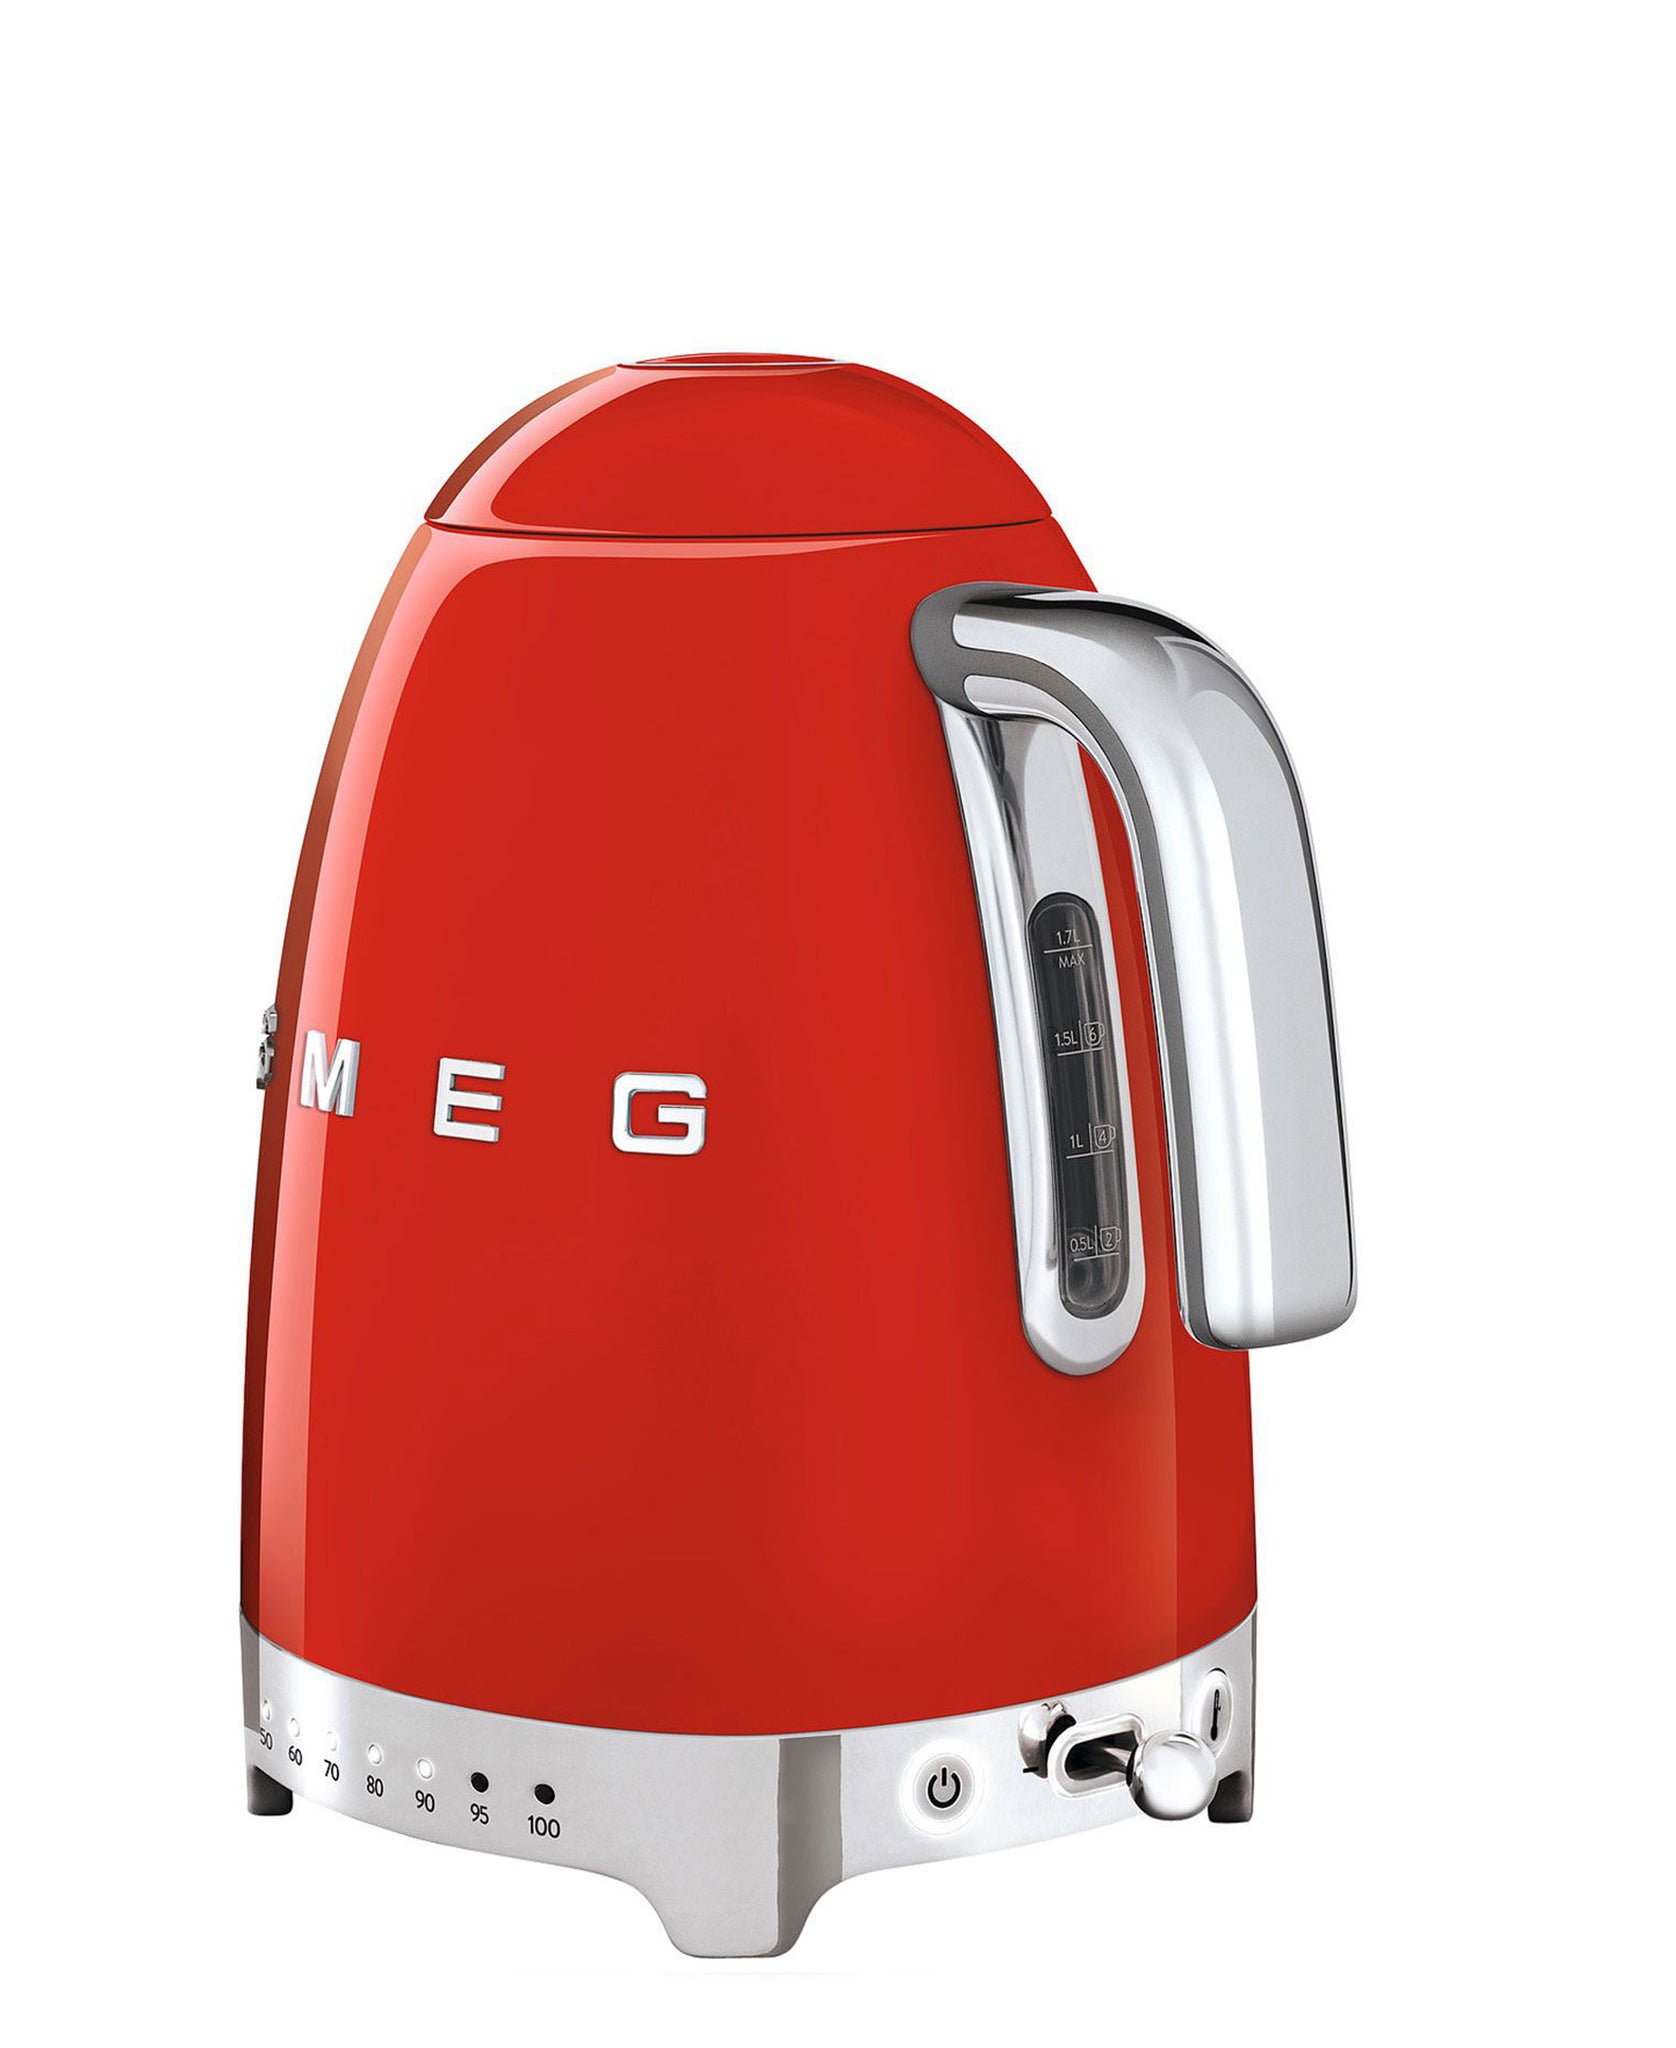 Smeg 50's Style Retro Variable Temperature Kettle - Red